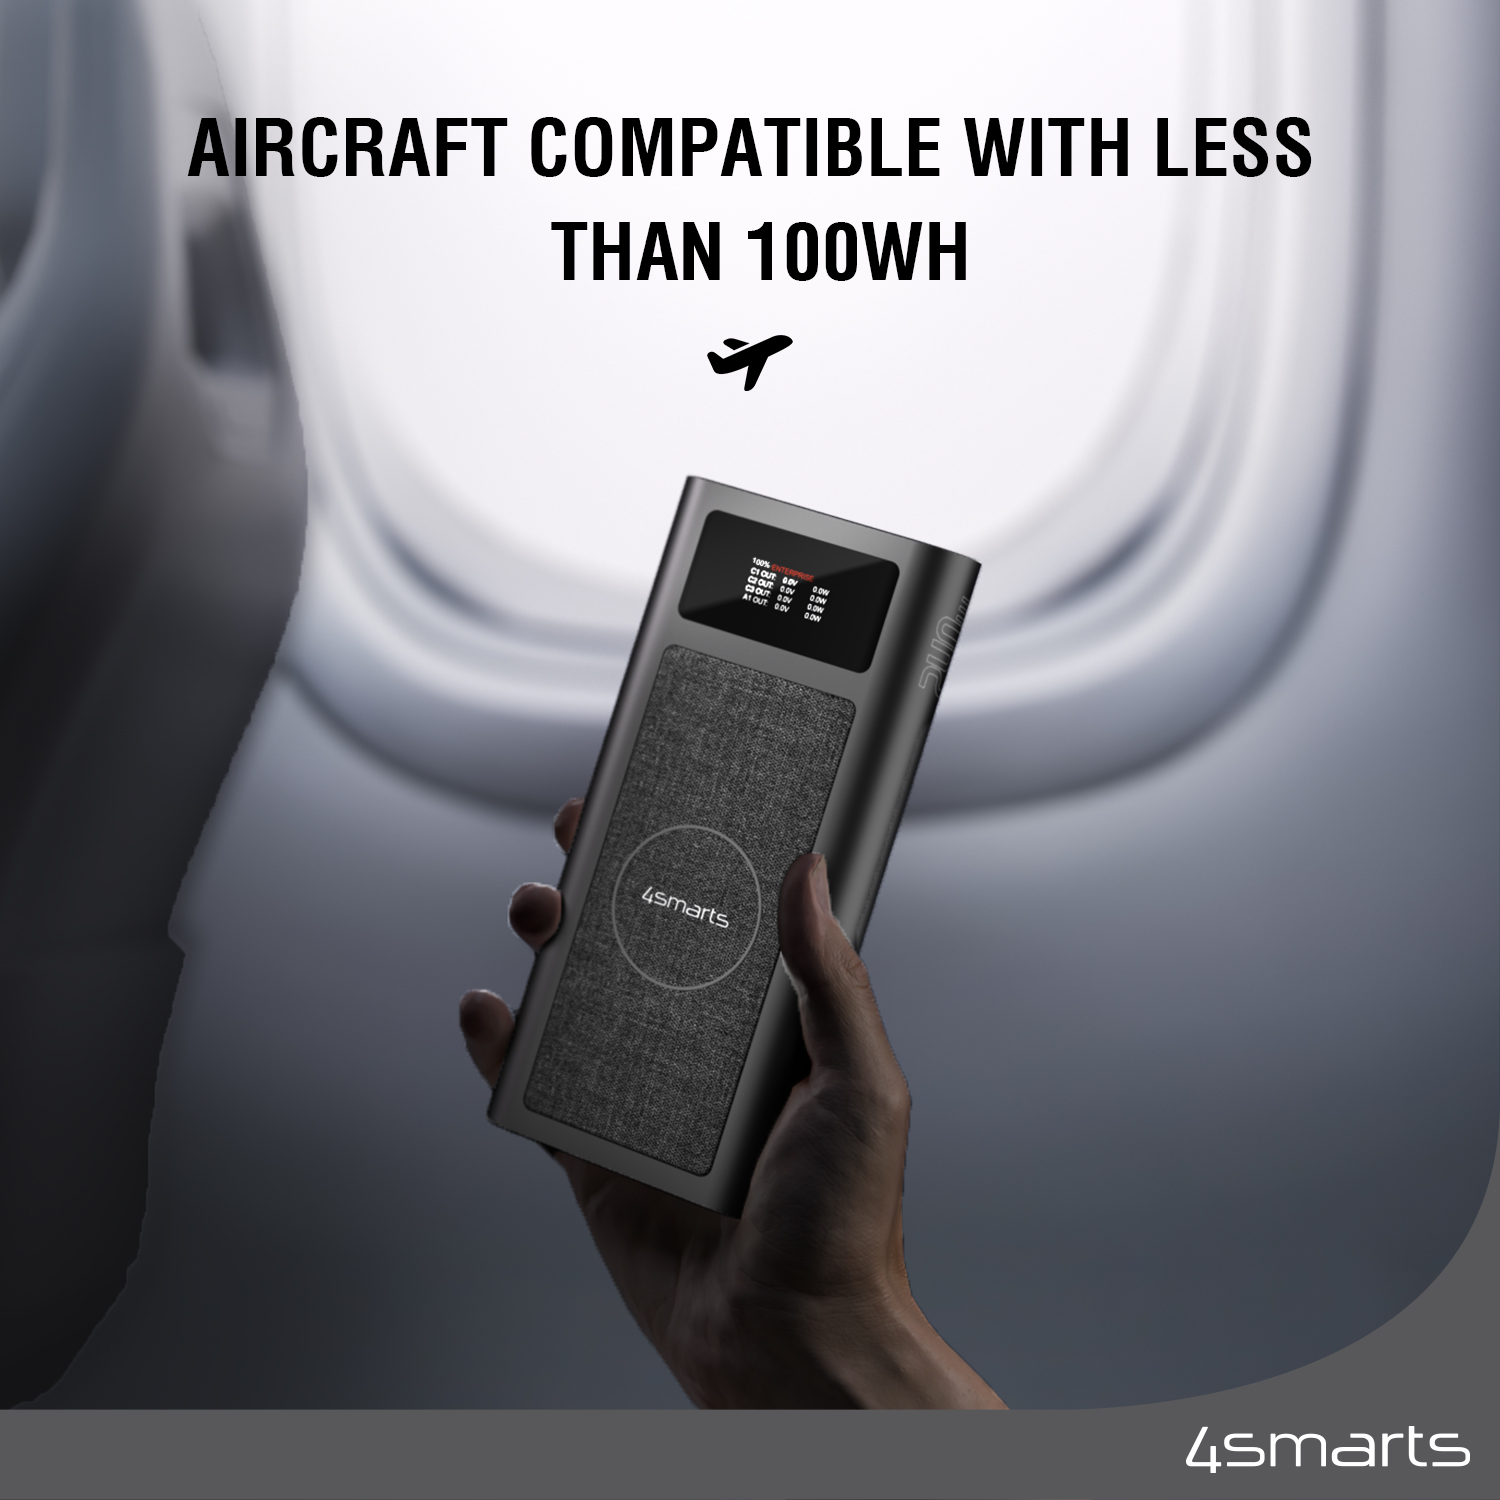 At under 100Wh, the 4smarts Enterprise Ultra Powerbank with 26800mAh charging capacity is airplane friendly.